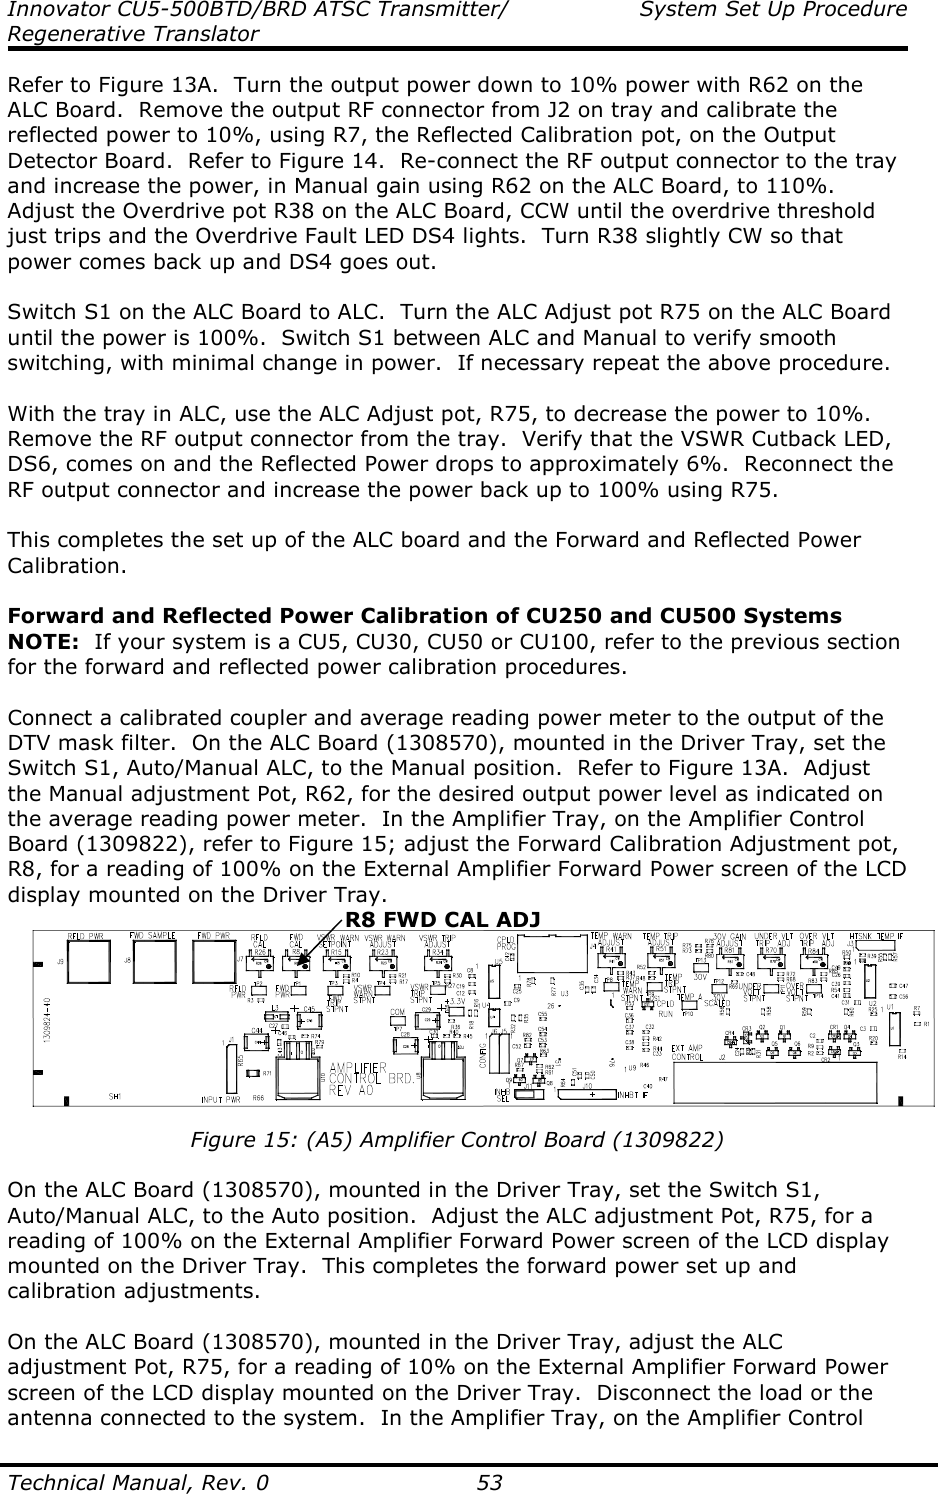 Innovator CU5-500BTD/BRD ATSC Transmitter/  System Set Up Procedure Regenerative Translator  Technical Manual, Rev. 0    53 Refer to Figure 13A.  Turn the output power down to 10% power with R62 on the ALC Board.  Remove the output RF connector from J2 on tray and calibrate the reflected power to 10%, using R7, the Reflected Calibration pot, on the Output Detector Board.  Refer to Figure 14.  Re-connect the RF output connector to the tray and increase the power, in Manual gain using R62 on the ALC Board, to 110%.  Adjust the Overdrive pot R38 on the ALC Board, CCW until the overdrive threshold just trips and the Overdrive Fault LED DS4 lights.  Turn R38 slightly CW so that power comes back up and DS4 goes out.   Switch S1 on the ALC Board to ALC.  Turn the ALC Adjust pot R75 on the ALC Board until the power is 100%.  Switch S1 between ALC and Manual to verify smooth switching, with minimal change in power.  If necessary repeat the above procedure.  With the tray in ALC, use the ALC Adjust pot, R75, to decrease the power to 10%.  Remove the RF output connector from the tray.  Verify that the VSWR Cutback LED, DS6, comes on and the Reflected Power drops to approximately 6%.  Reconnect the RF output connector and increase the power back up to 100% using R75.  This completes the set up of the ALC board and the Forward and Reflected Power Calibration.  Forward and Reflected Power Calibration of CU250 and CU500 Systems NOTE:  If your system is a CU5, CU30, CU50 or CU100, refer to the previous section for the forward and reflected power calibration procedures.  Connect a calibrated coupler and average reading power meter to the output of the DTV mask filter.  On the ALC Board (1308570), mounted in the Driver Tray, set the Switch S1, Auto/Manual ALC, to the Manual position.  Refer to Figure 13A.  Adjust the Manual adjustment Pot, R62, for the desired output power level as indicated on the average reading power meter.  In the Amplifier Tray, on the Amplifier Control Board (1309822), refer to Figure 15; adjust the Forward Calibration Adjustment pot, R8, for a reading of 100% on the External Amplifier Forward Power screen of the LCD display mounted on the Driver Tray.  Figure 15: (A5) Amplifier Control Board (1309822)  On the ALC Board (1308570), mounted in the Driver Tray, set the Switch S1, Auto/Manual ALC, to the Auto position.  Adjust the ALC adjustment Pot, R75, for a reading of 100% on the External Amplifier Forward Power screen of the LCD display mounted on the Driver Tray.  This completes the forward power set up and calibration adjustments.  On the ALC Board (1308570), mounted in the Driver Tray, adjust the ALC adjustment Pot, R75, for a reading of 10% on the External Amplifier Forward Power screen of the LCD display mounted on the Driver Tray.  Disconnect the load or the antenna connected to the system.  In the Amplifier Tray, on the Amplifier Control R8 FWD CAL ADJ 